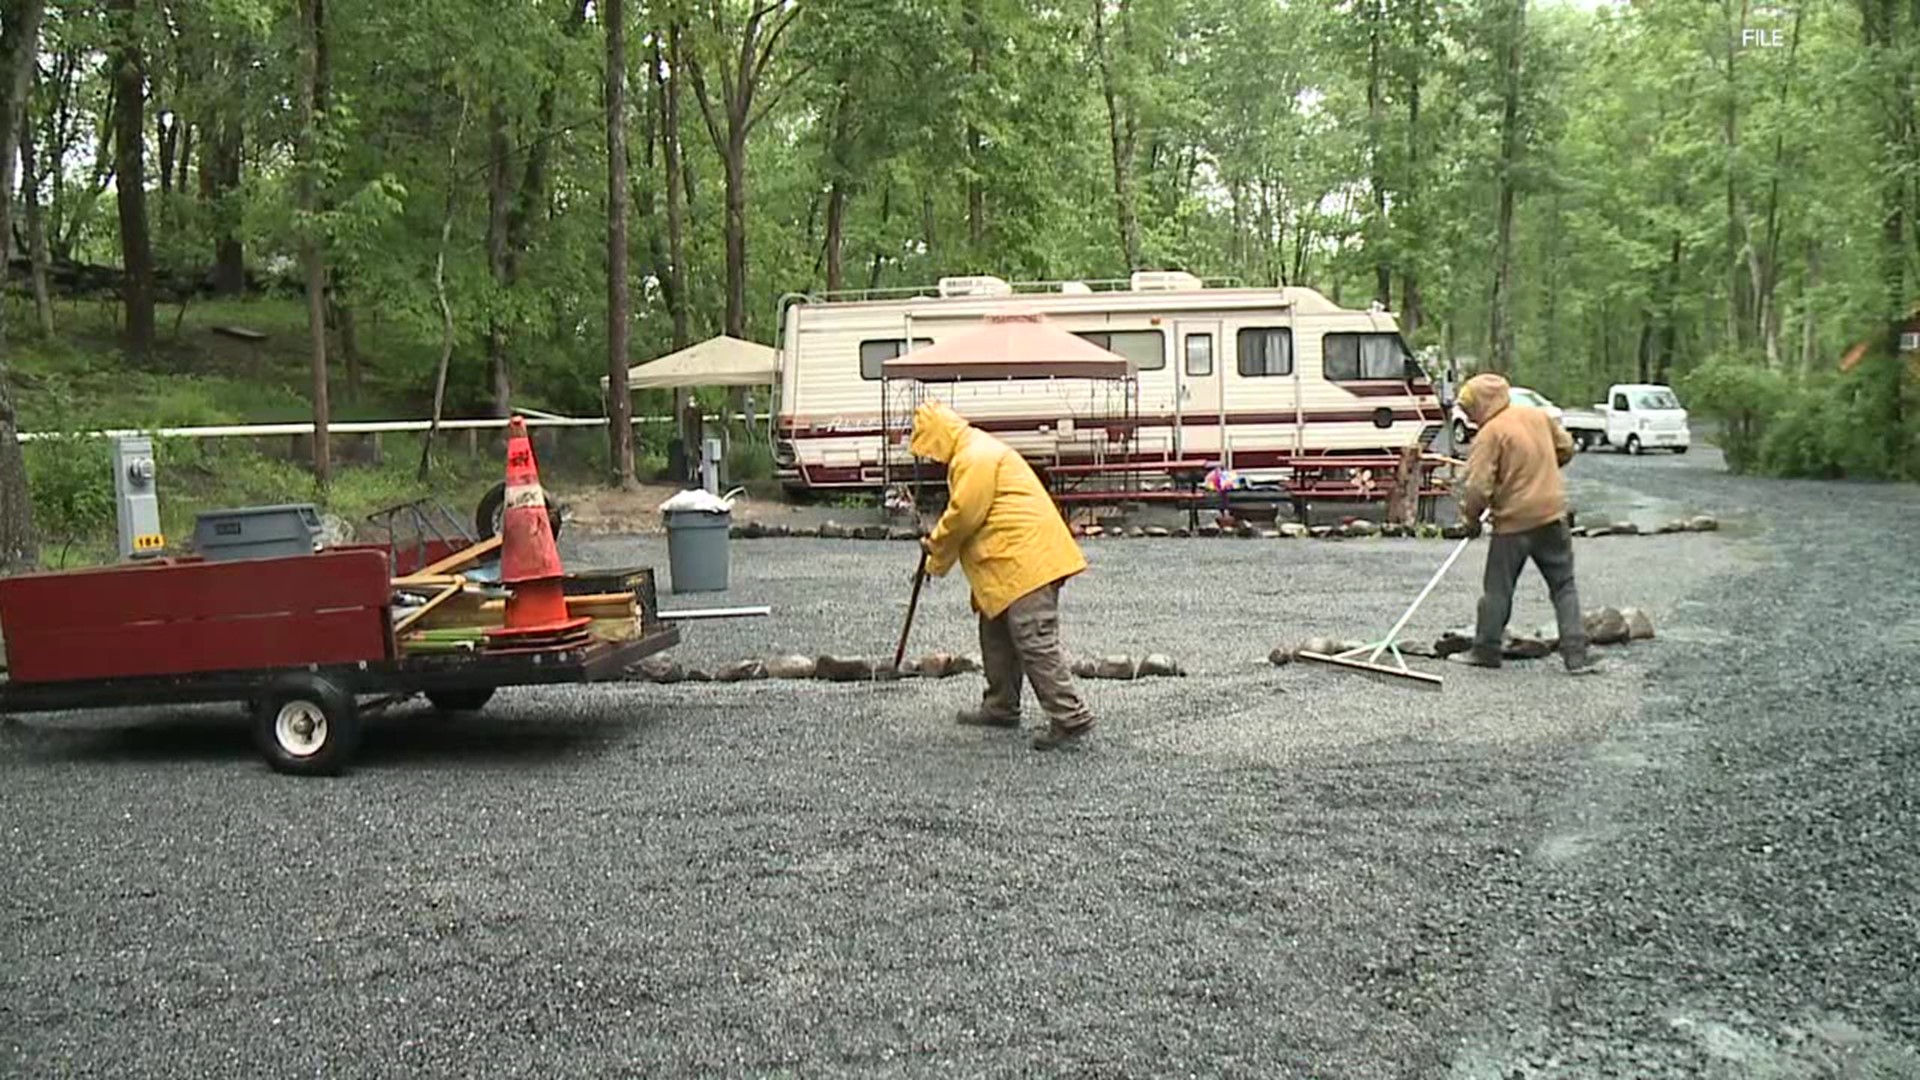 Privately owned campgrounds across the state got the green light to open this Friday.